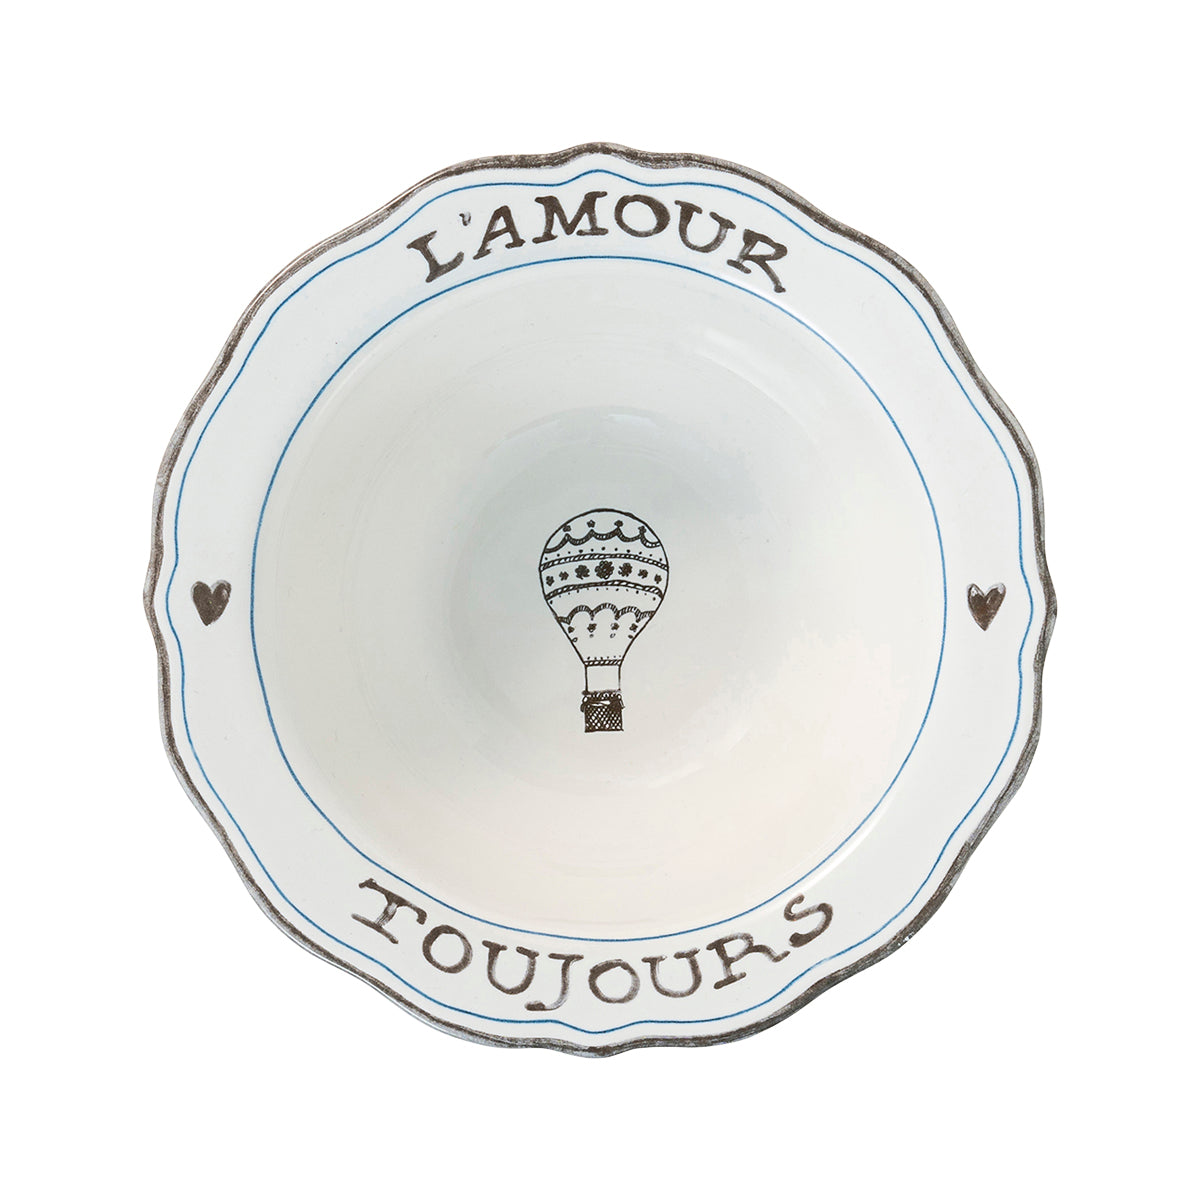 L'Amour Toujours Cereal/Ice Cream Bowl